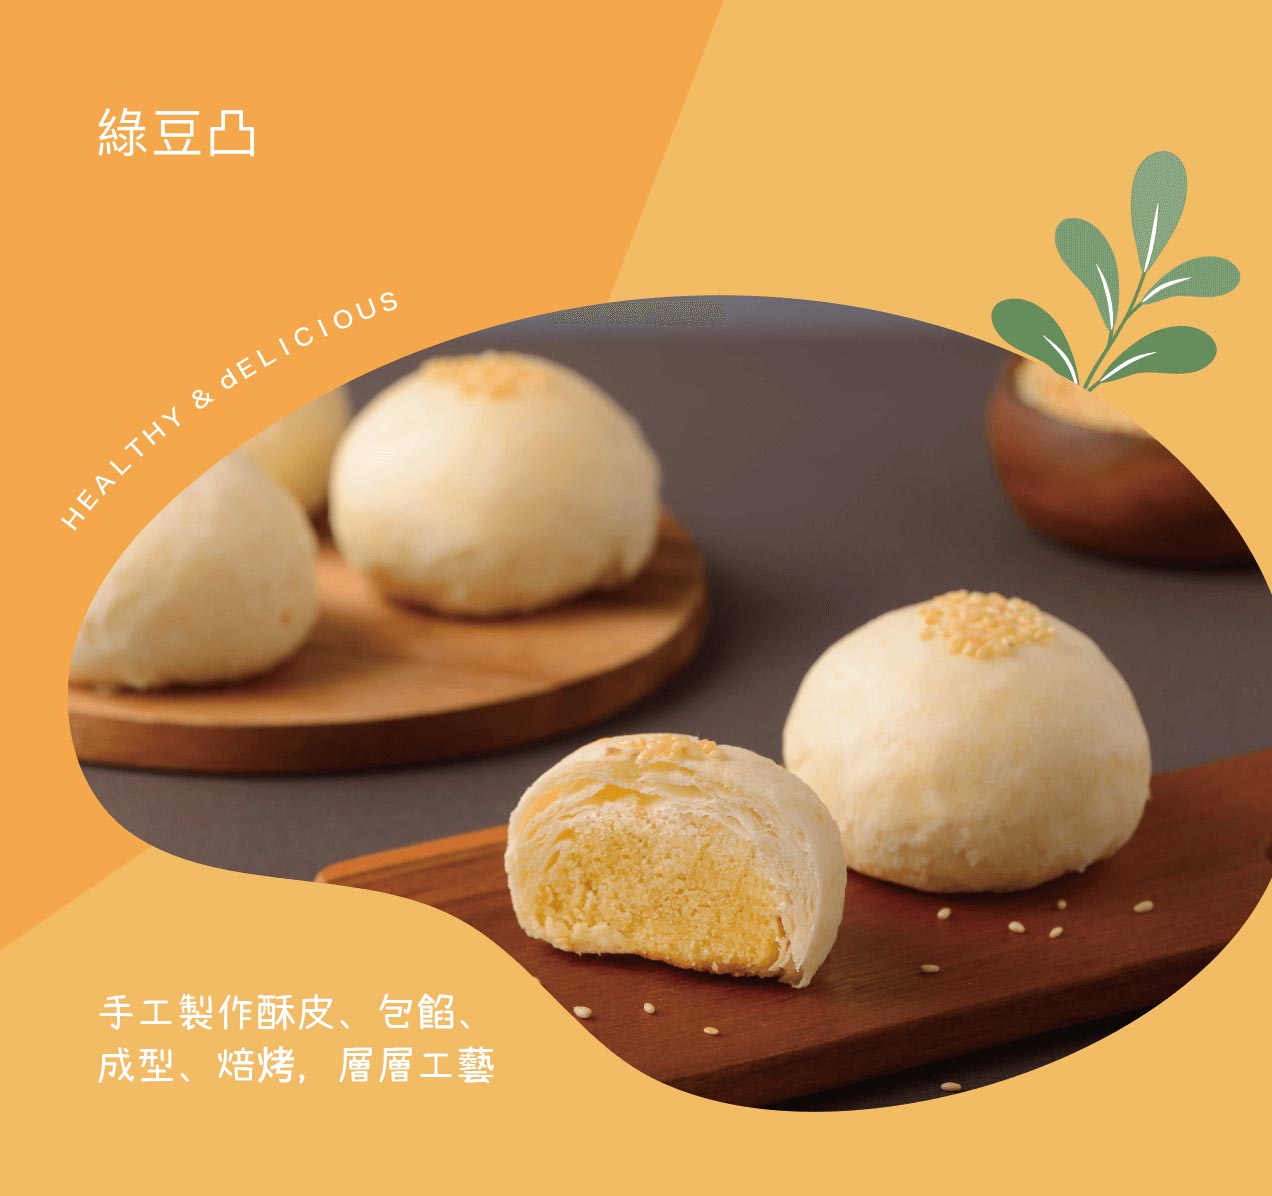 Wholesome - Mung Bean Pastry 【8 pcs】